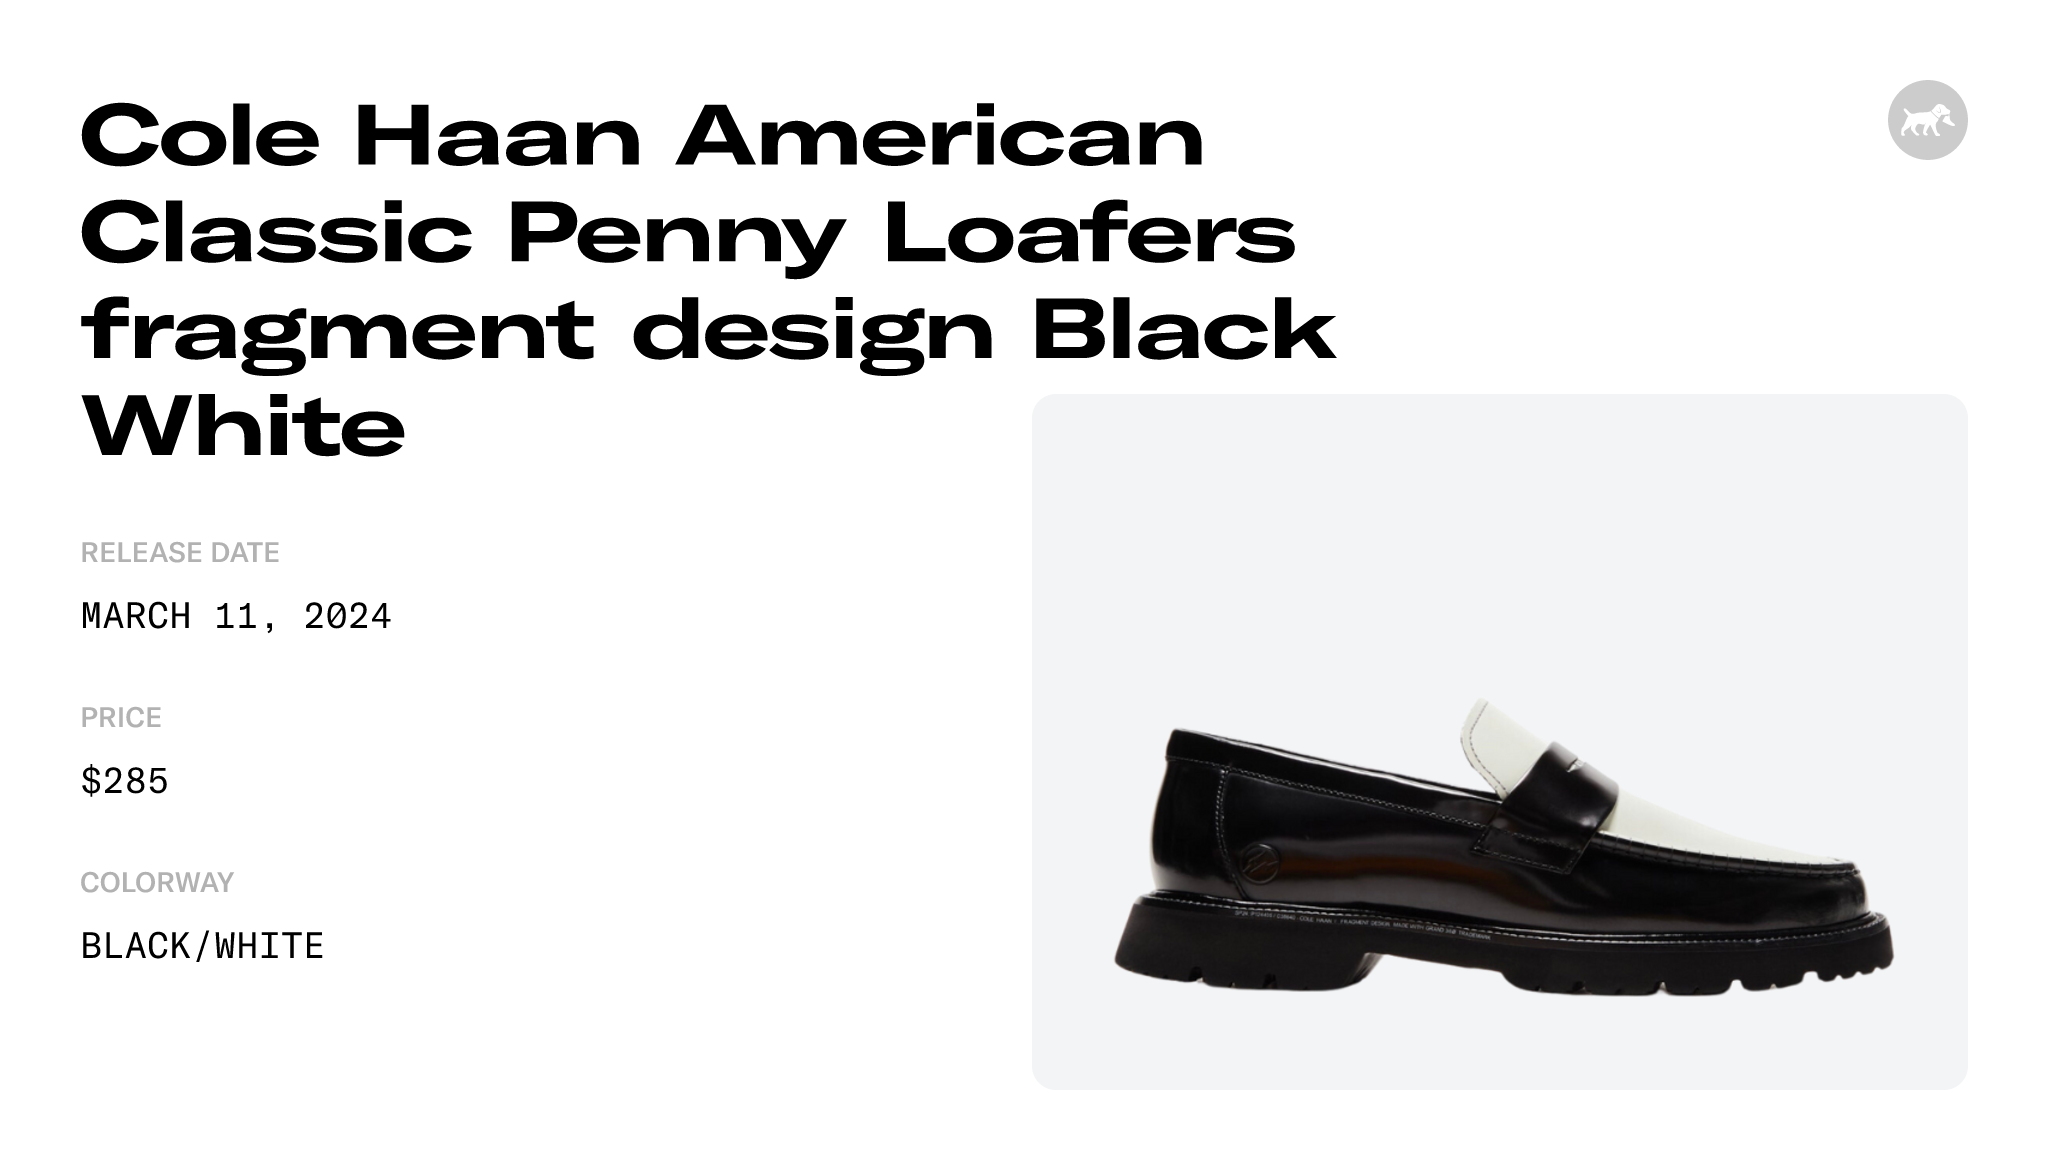 Cole Haan American Classic Penny Loafers fragment design Black White  Raffles and Release Date